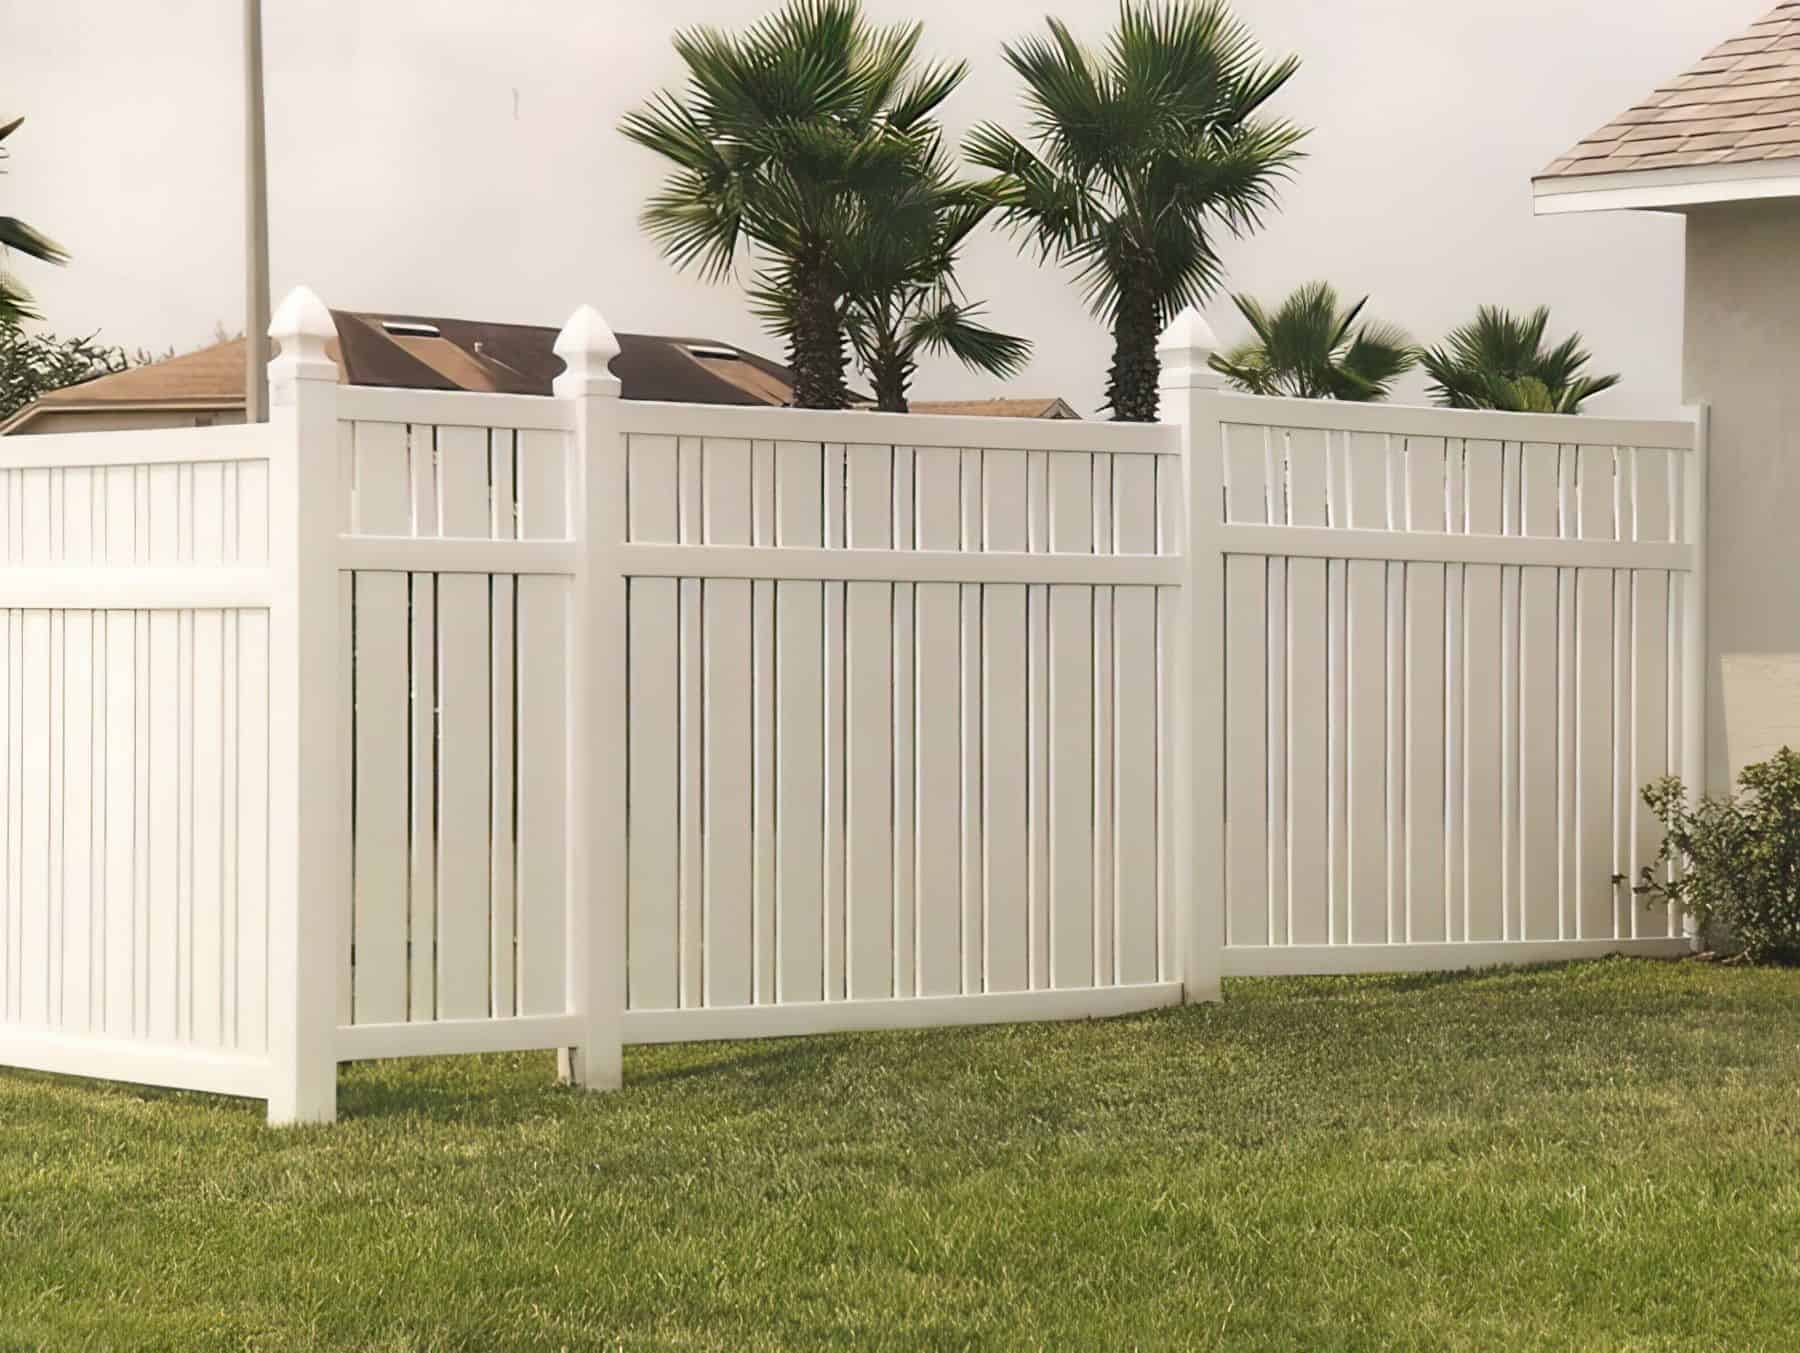 Slatted vinyl semi-privacy fence with stylized gaps in between, beside the muted beige wall and on top of the grassy lawn